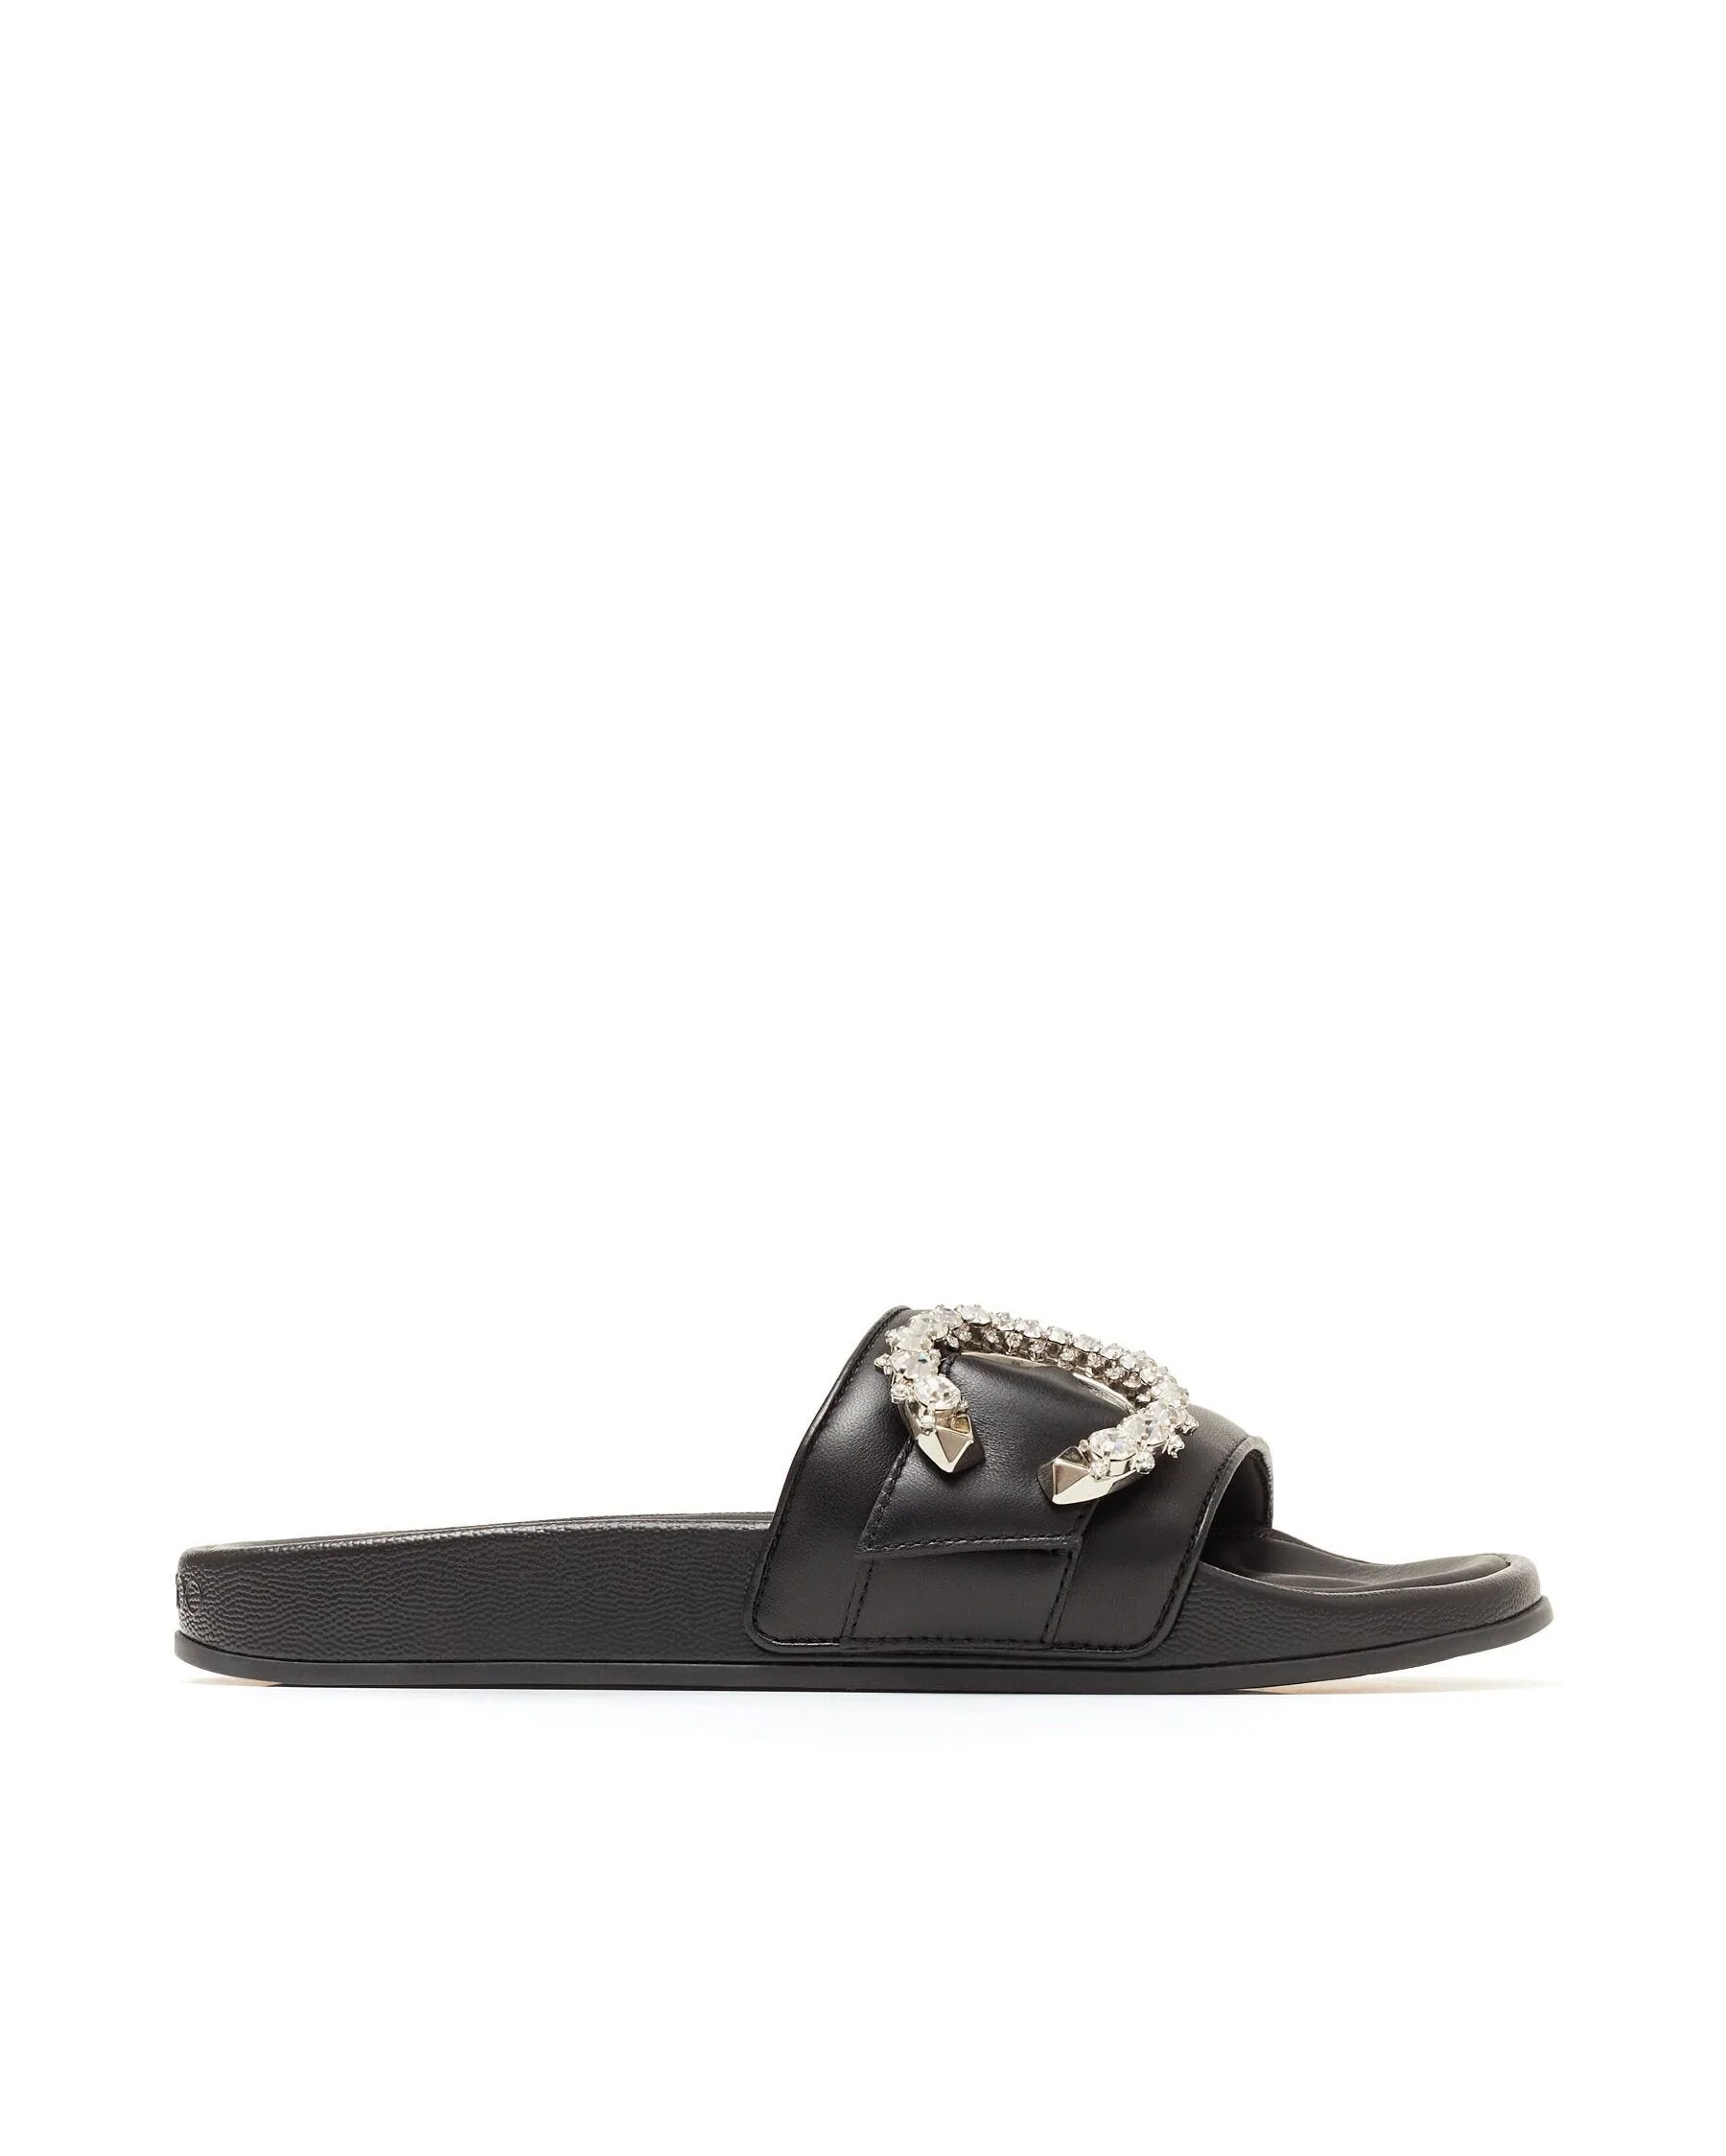 Jimmy Choo Fallon Black Nappa Leather Slides With Crystal Buckle